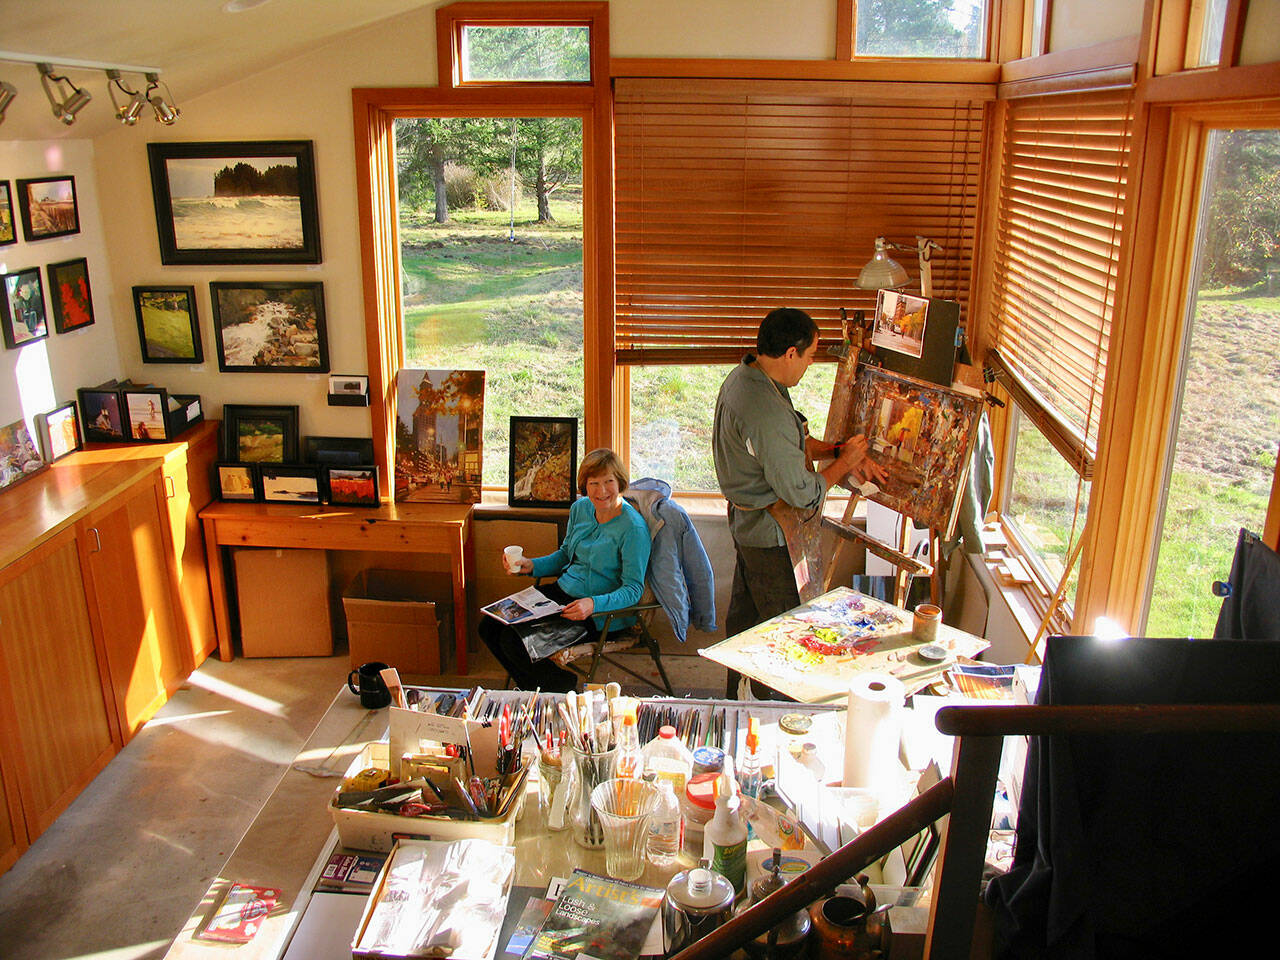 Local oil painter Robin Weiss (right) at work during a previous year’s Art in the Woods studio tour. Courtesy Photos